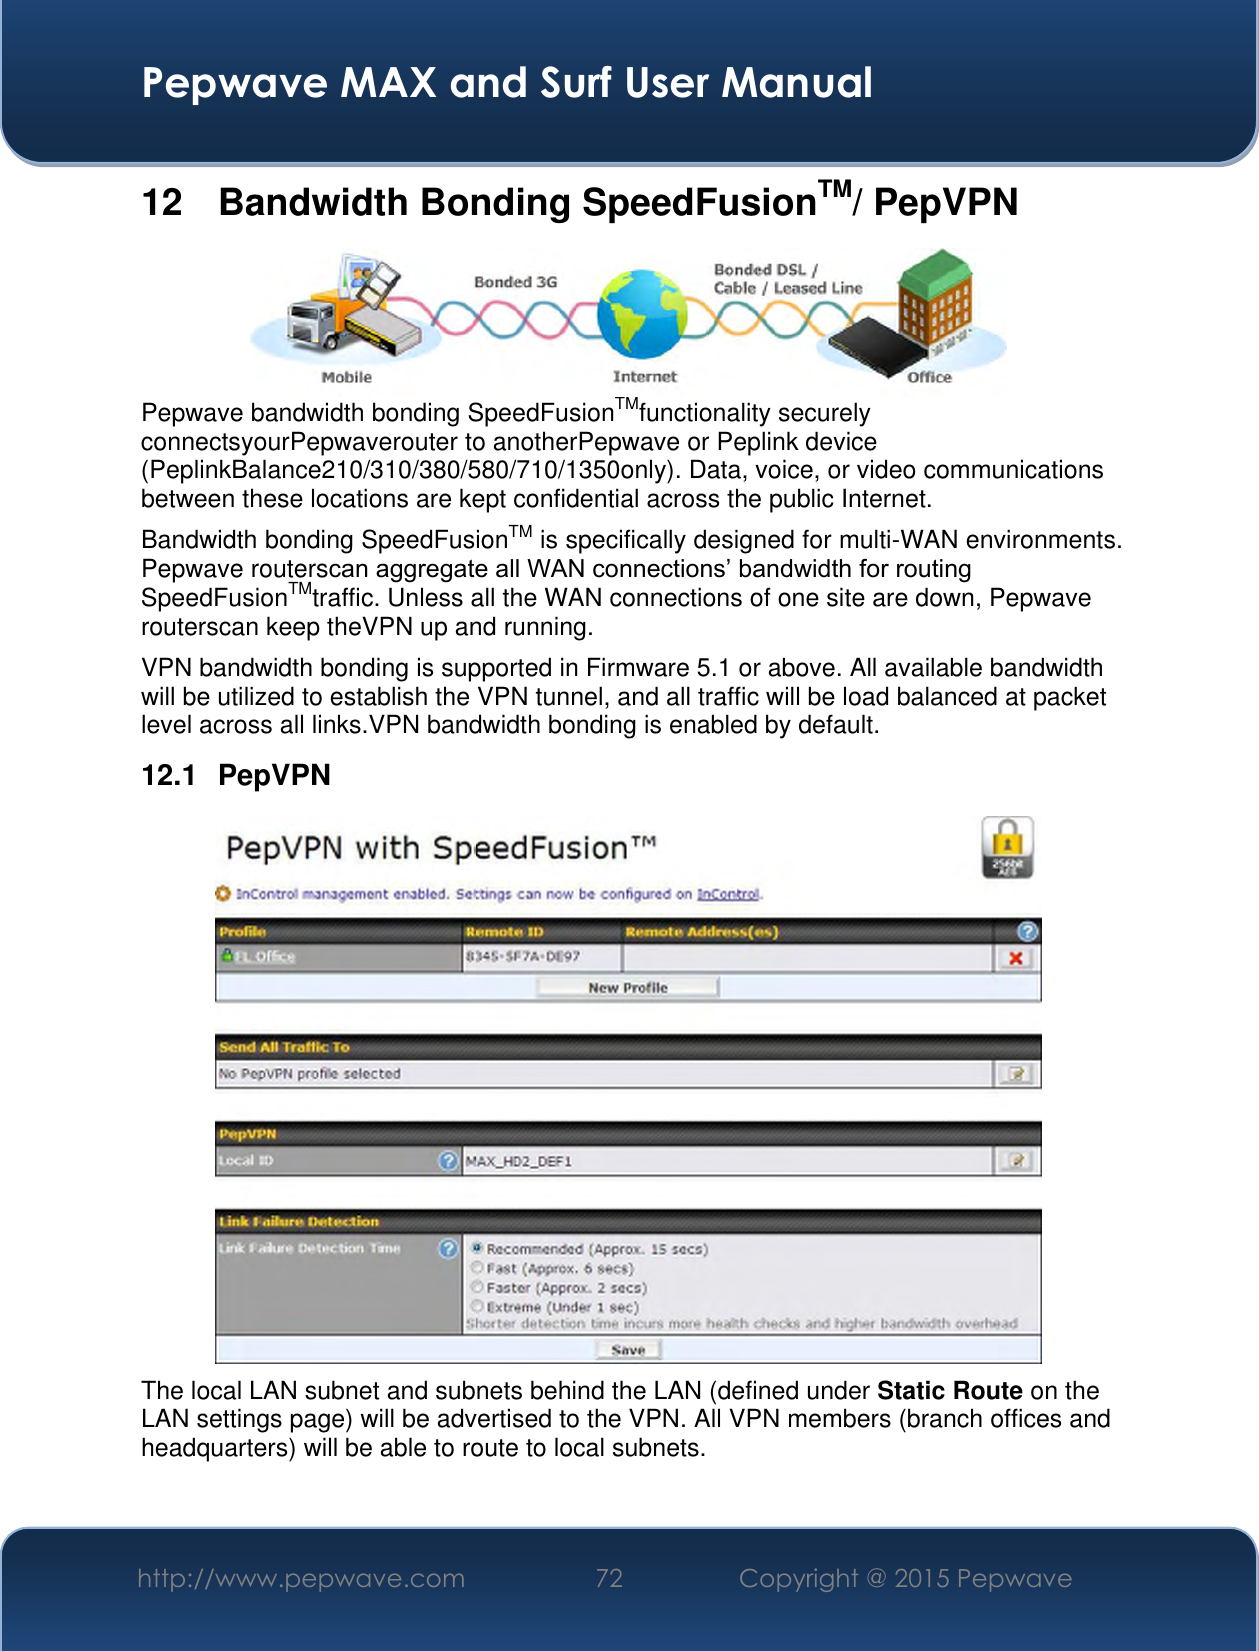  Pepwave MAX and Surf User Manual http://www.pepwave.com 72 Copyright @ 2015 Pepwave   12  Bandwidth Bonding SpeedFusionTM/ PepVPN  Pepwave bandwidth bonding SpeedFusionTMfunctionality securely connectsyourPepwaverouter to anotherPepwave or Peplink device (PeplinkBalance210/310/380/580/710/1350only). Data, voice, or video communications between these locations are kept confidential across the public Internet. Bandwidth bonding SpeedFusionTM is specifically designed for multi-WAN environments. Pepwave routerscan aggregate all WAN connections’ bandwidth for routing SpeedFusionTMtraffic. Unless all the WAN connections of one site are down, Pepwave routerscan keep theVPN up and running. VPN bandwidth bonding is supported in Firmware 5.1 or above. All available bandwidth will be utilized to establish the VPN tunnel, and all traffic will be load balanced at packet level across all links.VPN bandwidth bonding is enabled by default.  12.1  PepVPN  The local LAN subnet and subnets behind the LAN (defined under Static Route on the LAN settings page) will be advertised to the VPN. All VPN members (branch offices and headquarters) will be able to route to local subnets.  